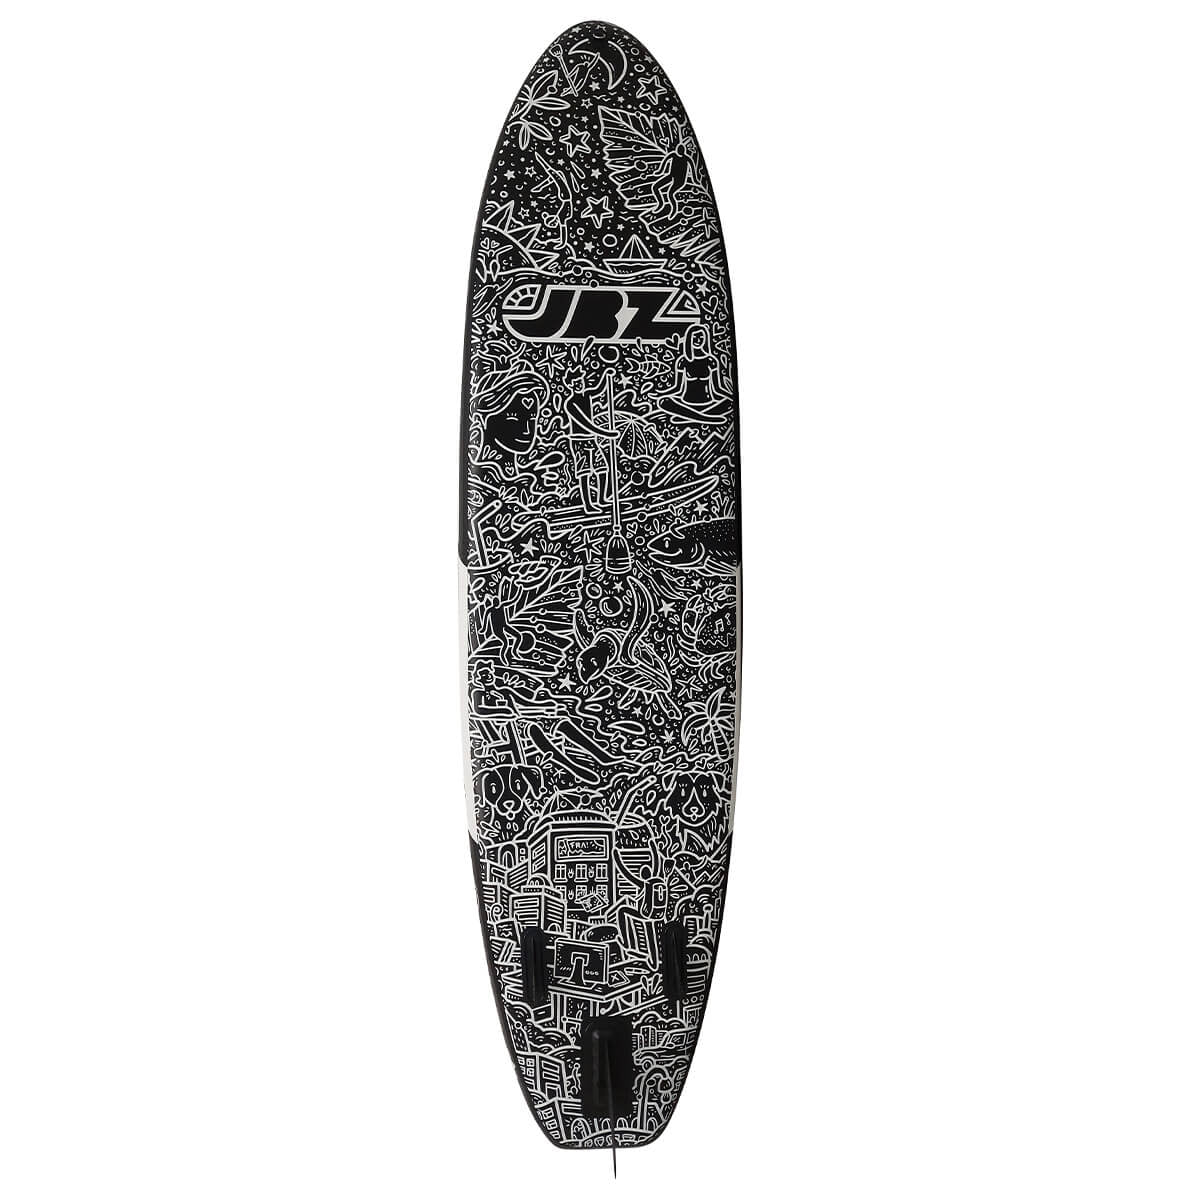 Stand Up Paddle Jbay.Zone FRA! Special Edition Black